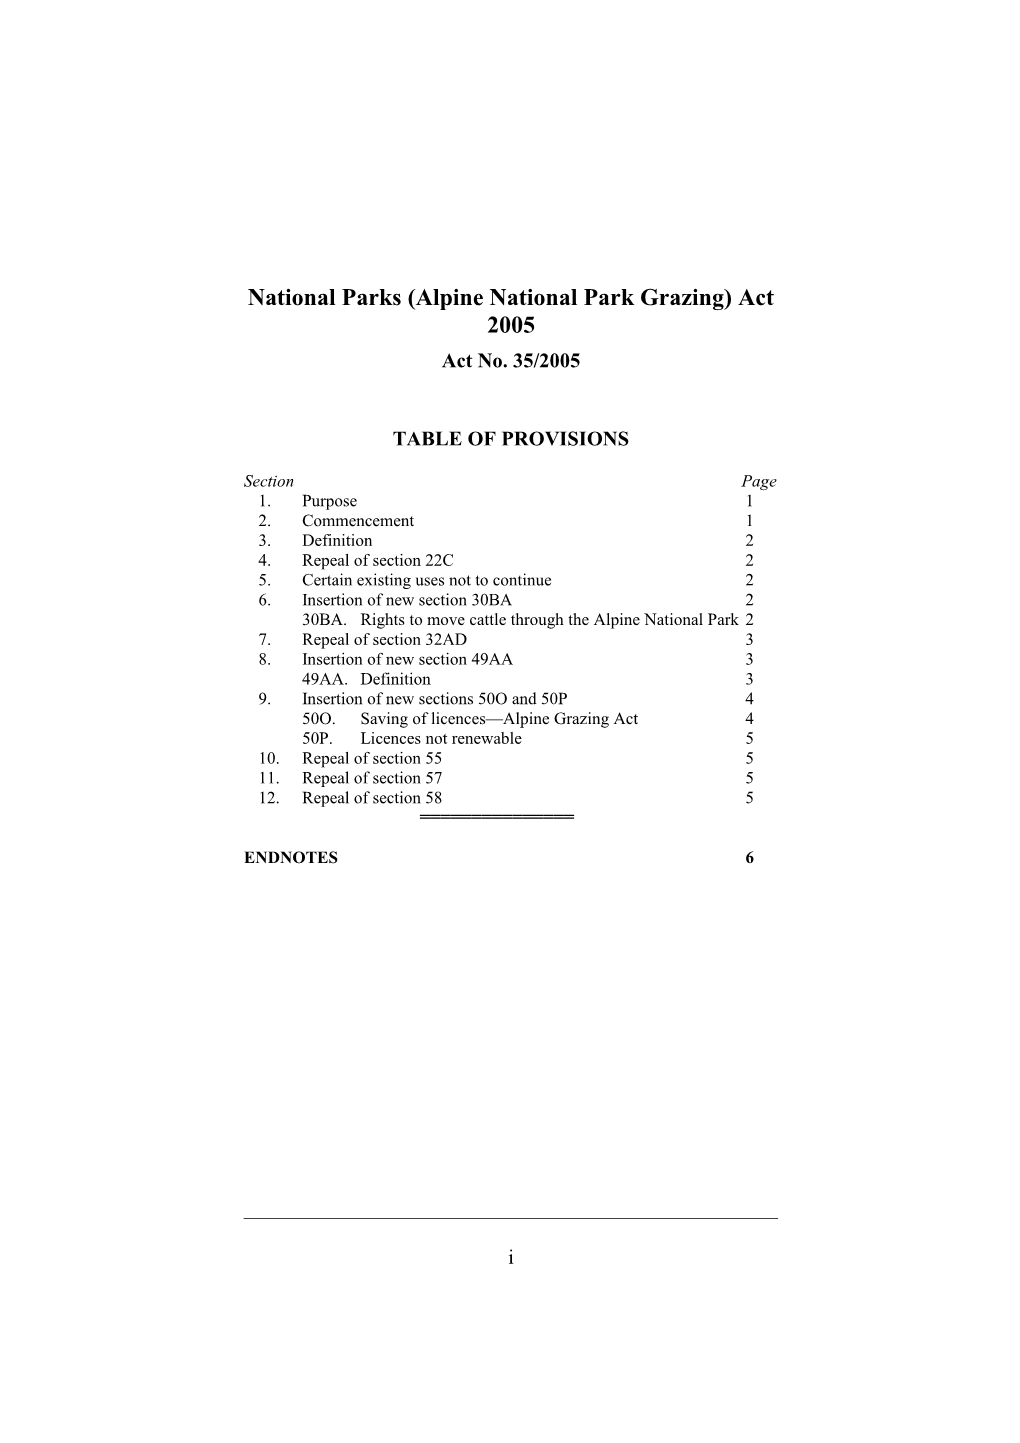 National Parks (Alpine National Park Grazing) Act 2005